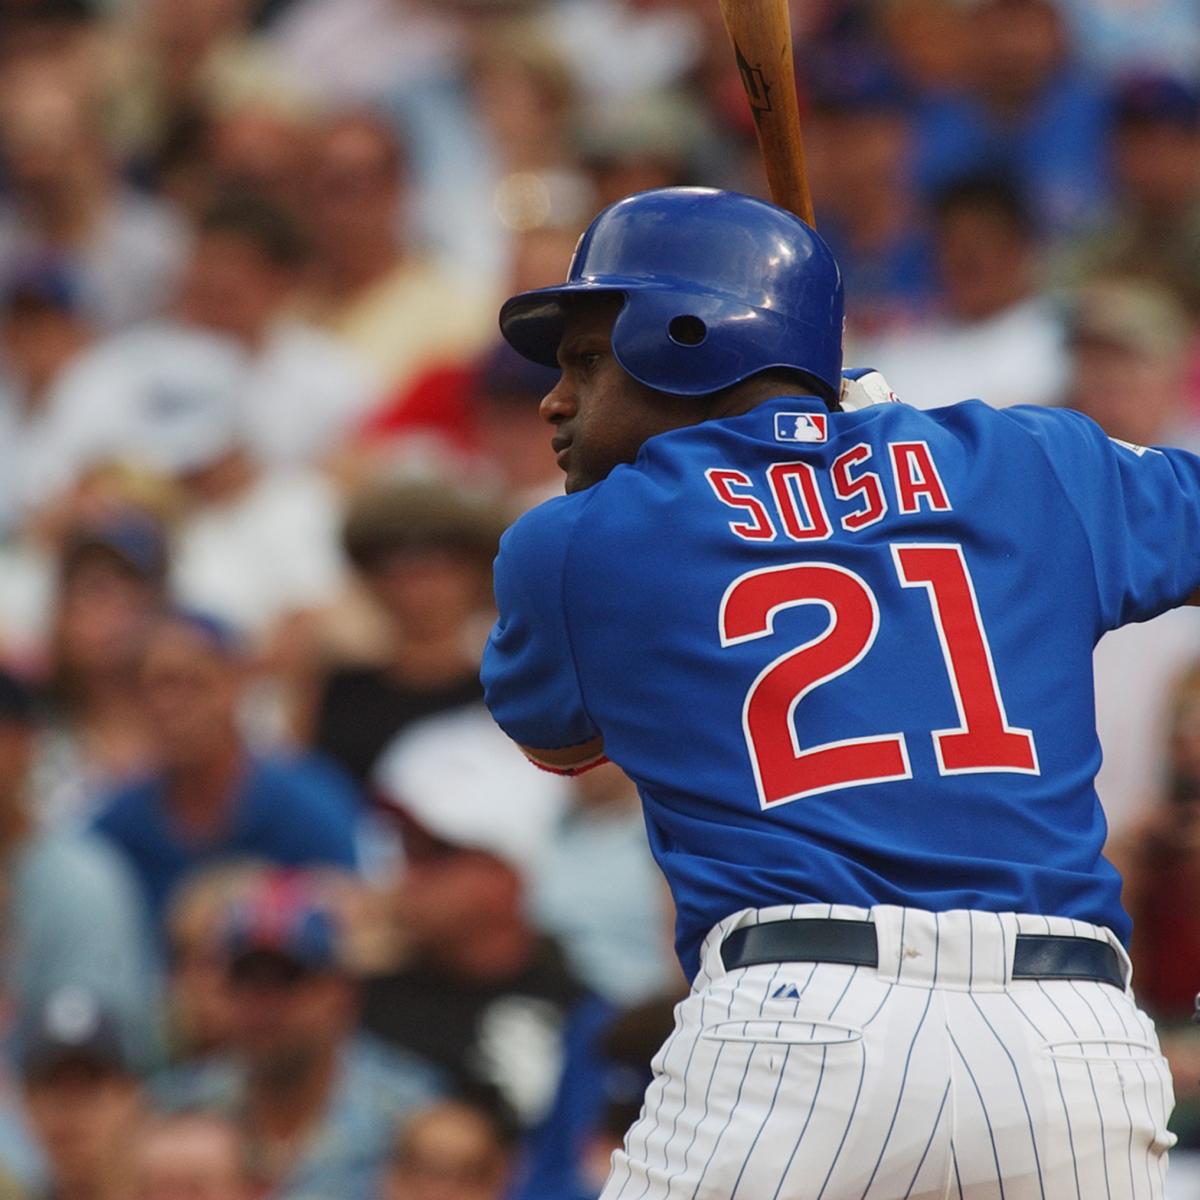 Sammy Sosa says Cubs don't care about him - The San Diego Union